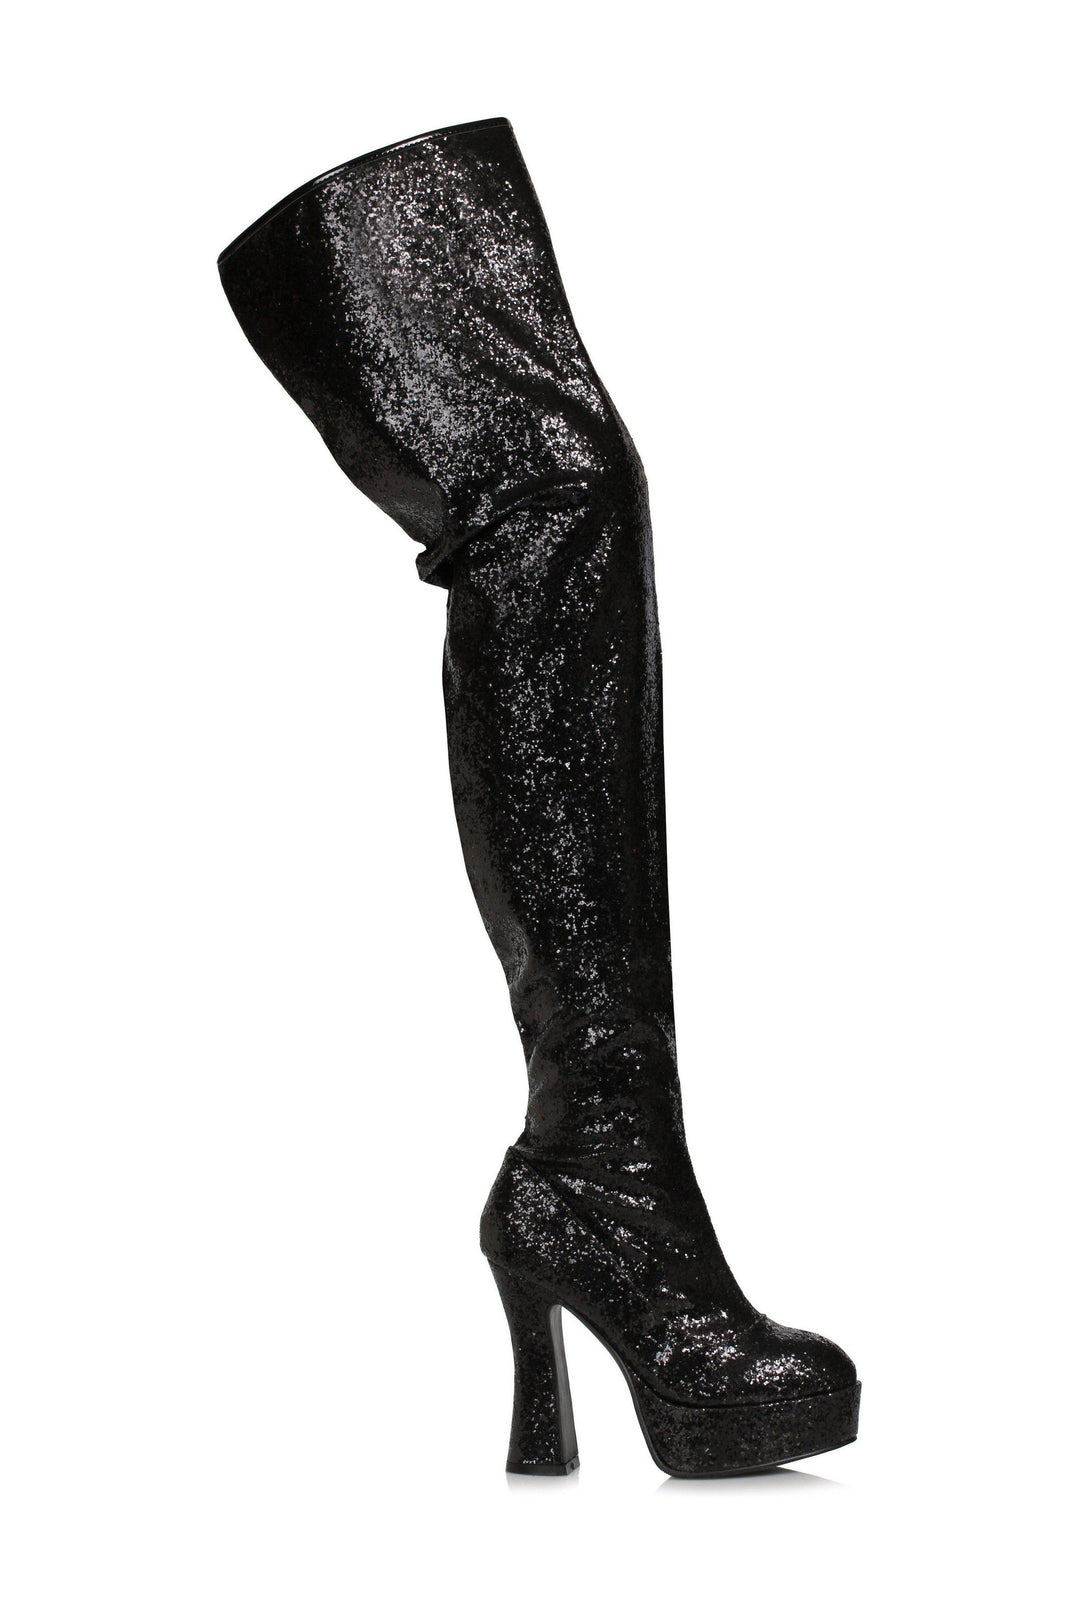 Ellie Shoes 557-BRIGHT Chunky Heel Women's Glitter Thigh High Boot